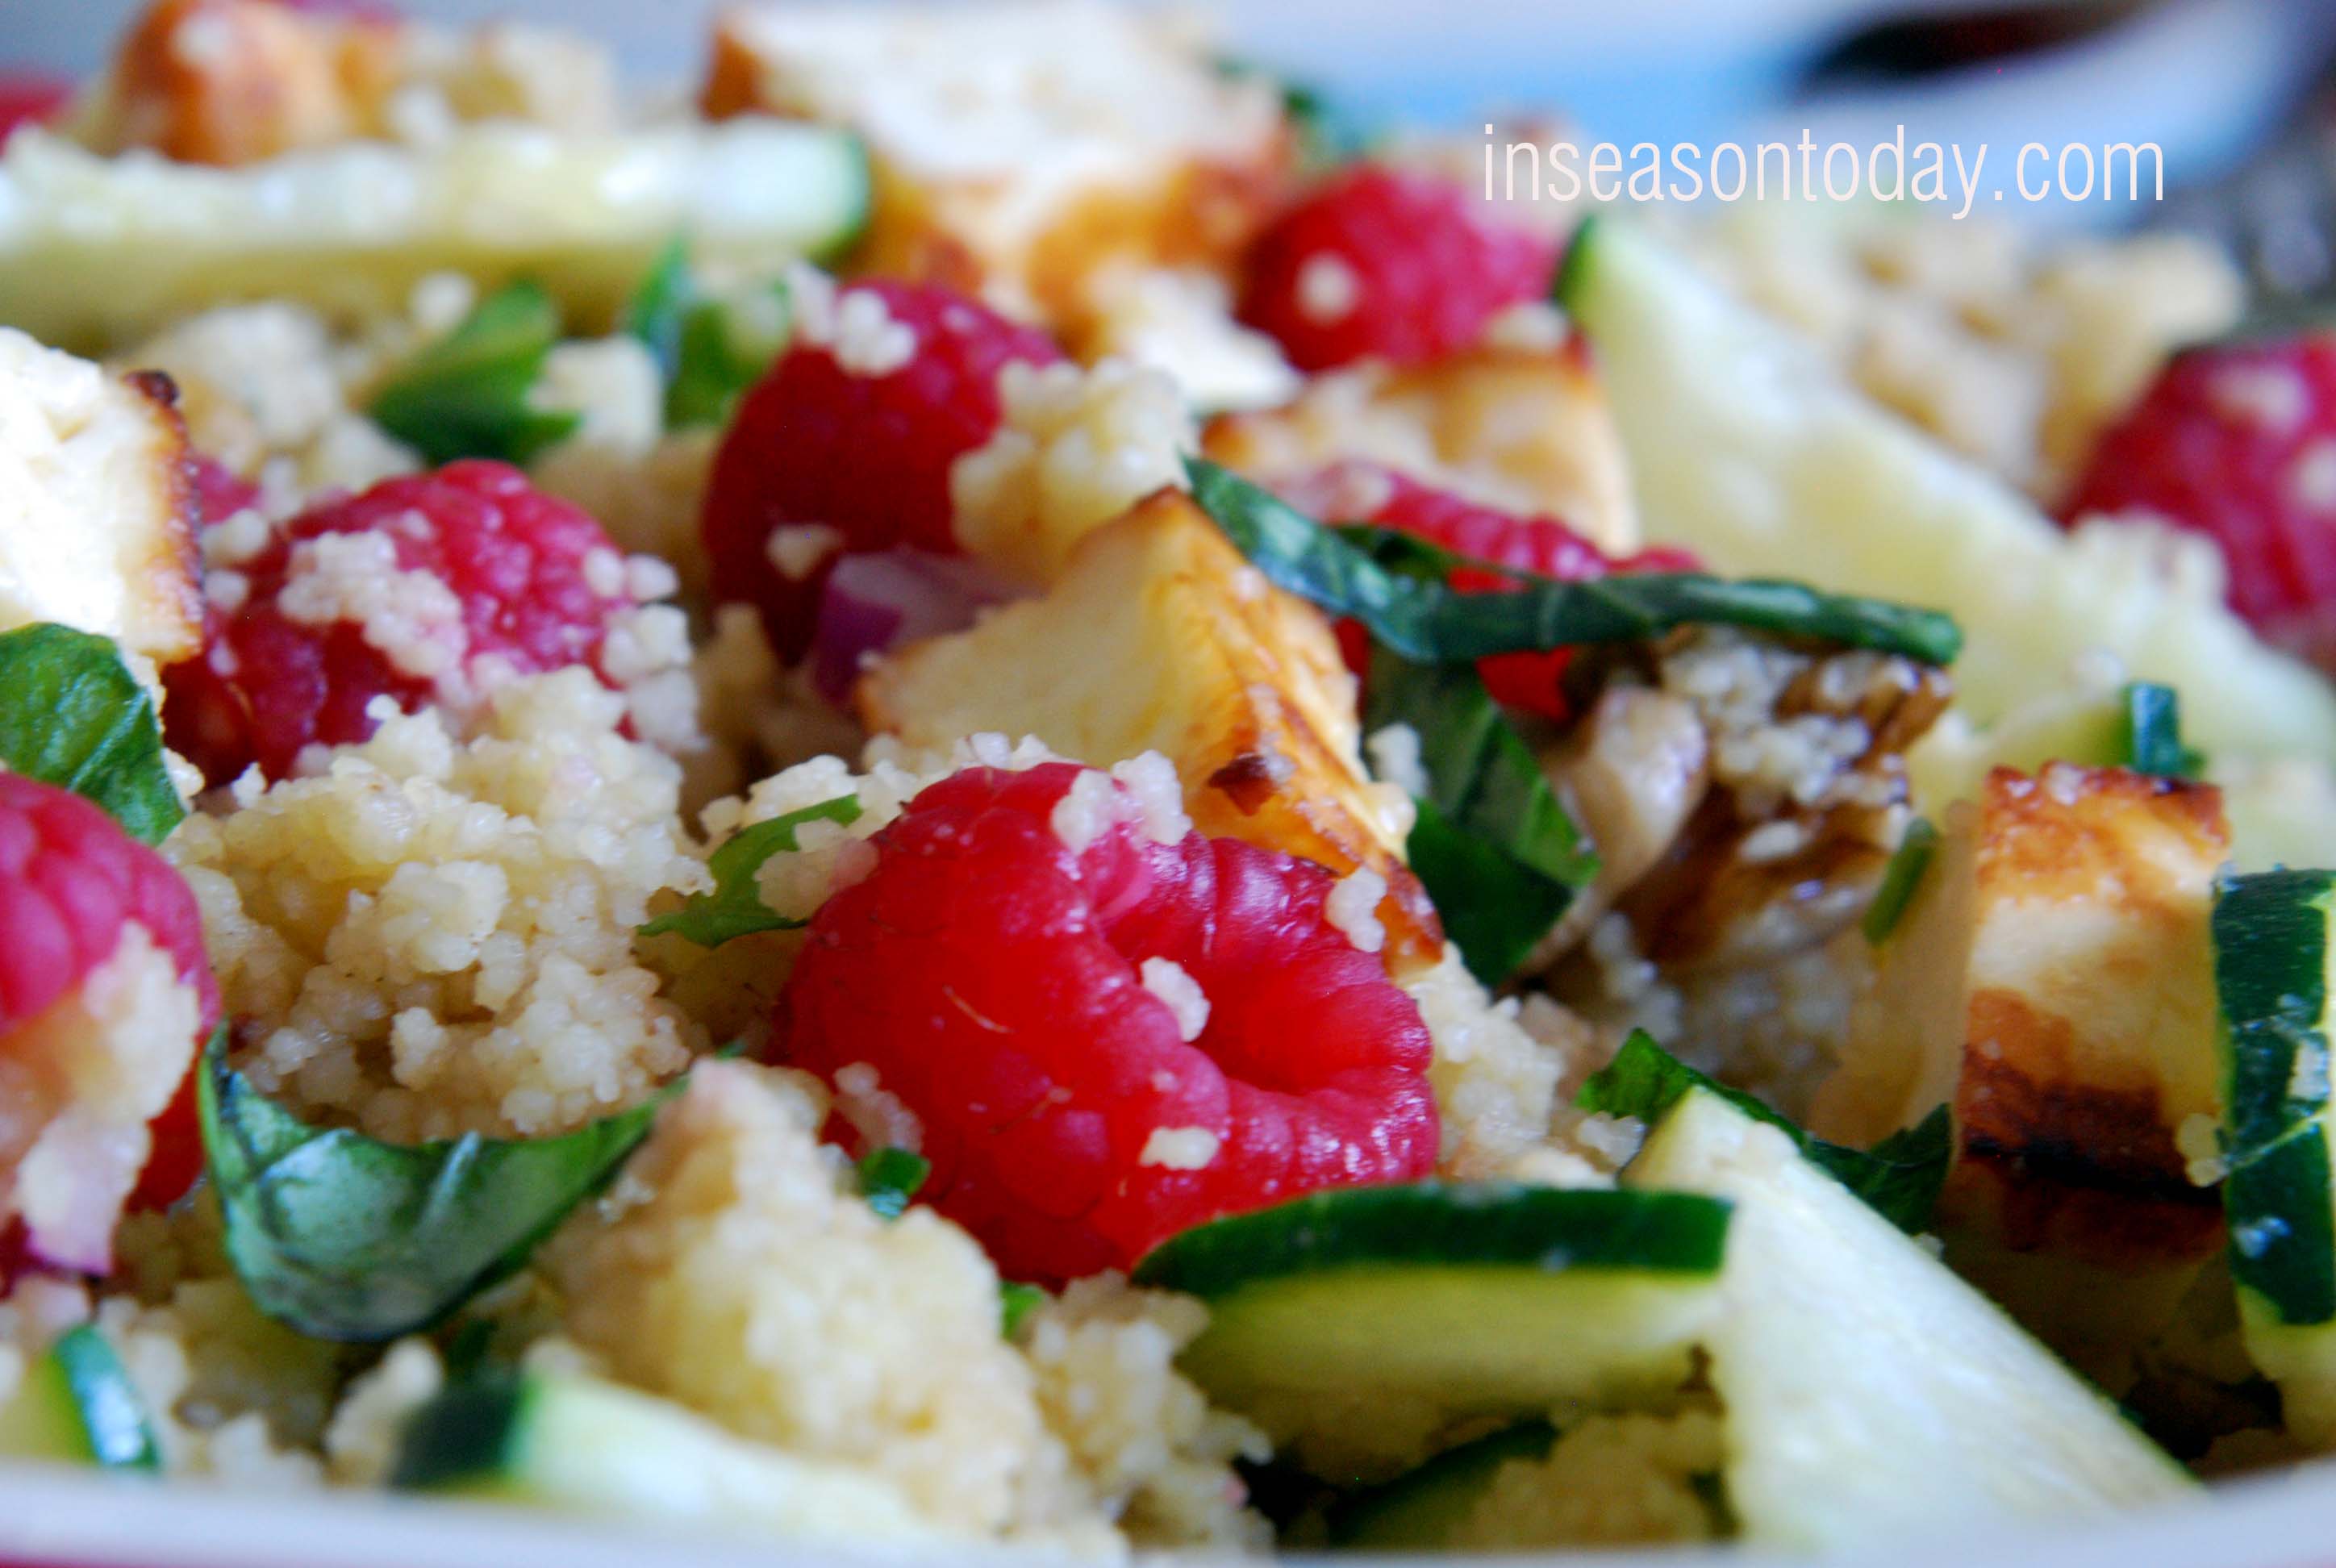 Raspberries and Halloumi Salad With Couscous 2